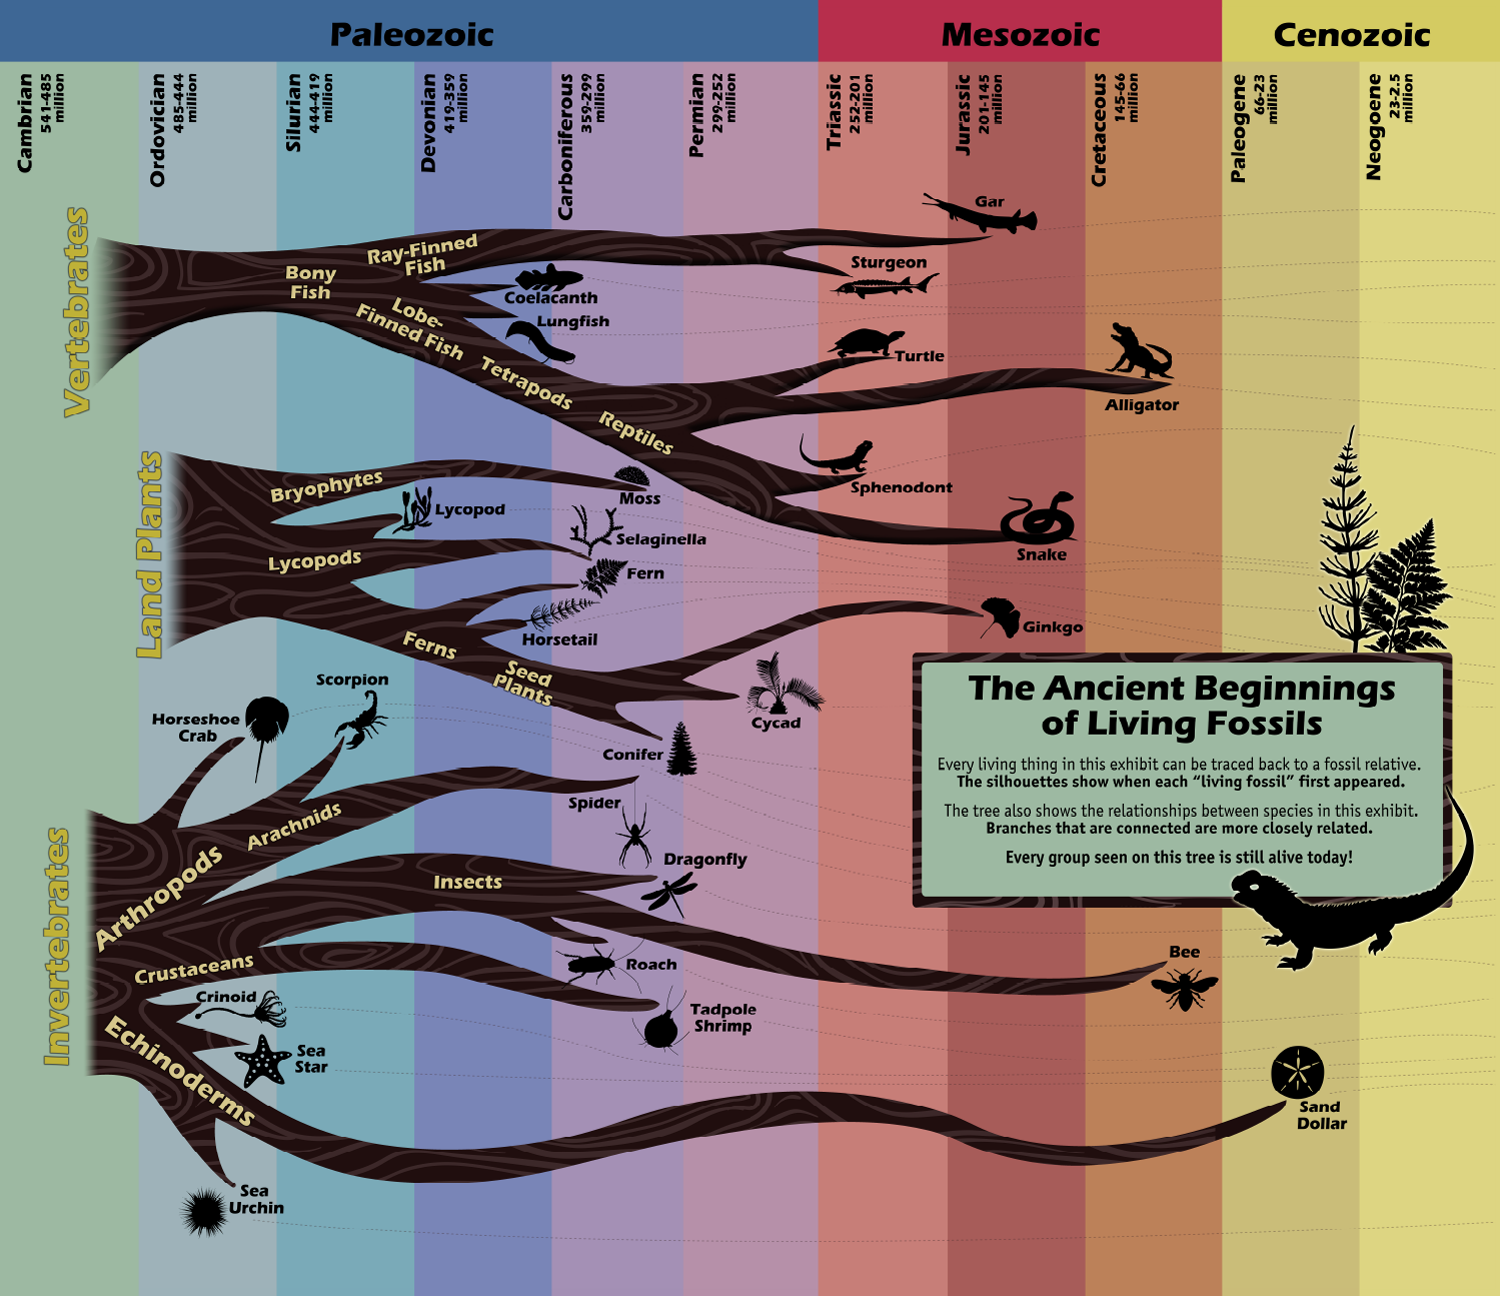 Image is a diagram that shows the fossil histories and relationships of a variety of "living fossils."